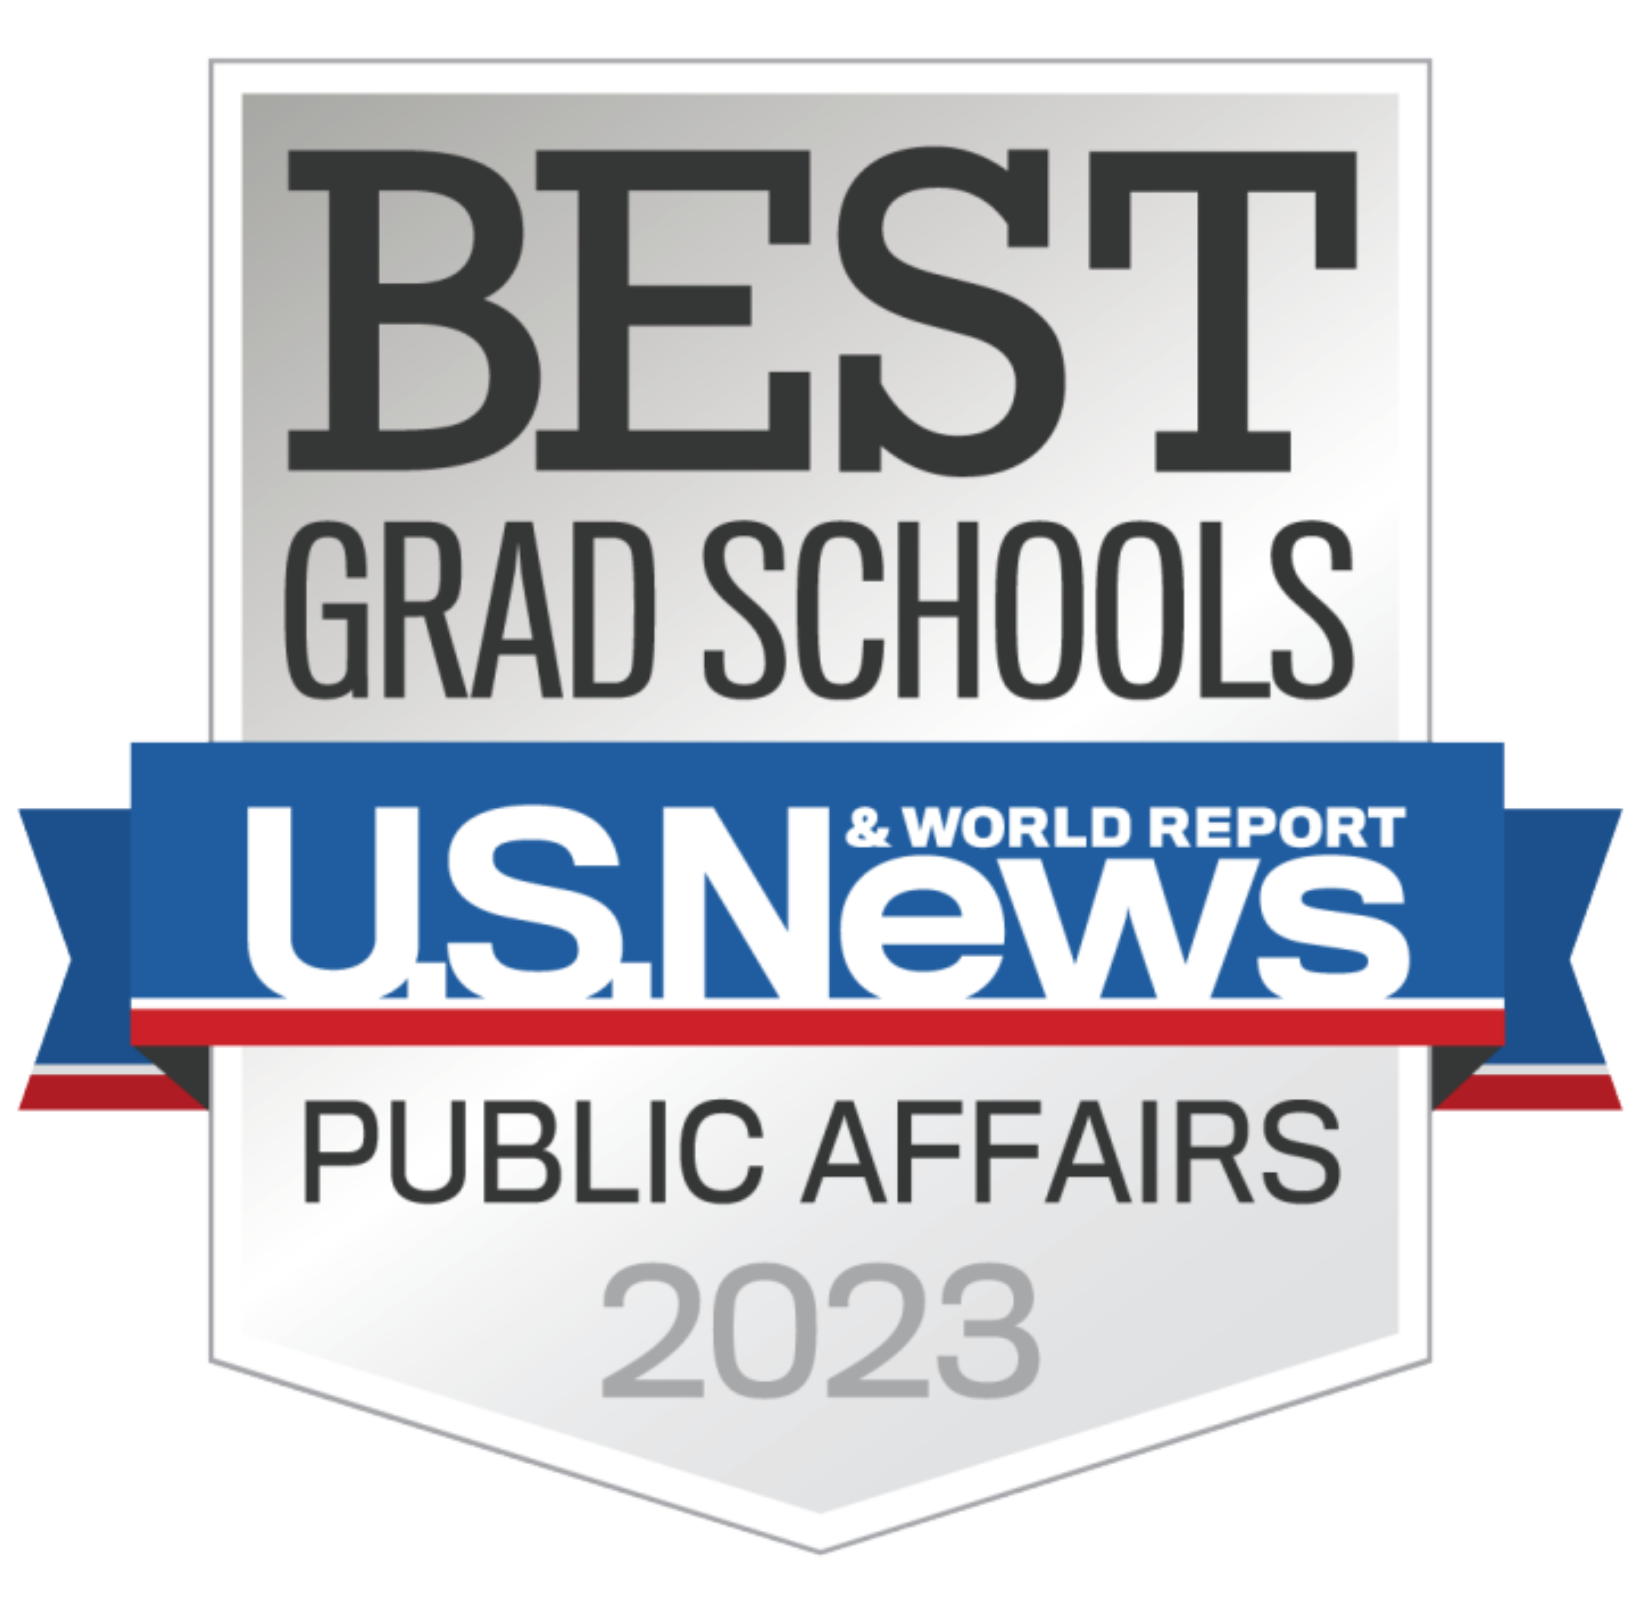 U.S. News & World Report - Best Grad Schools in public management and administration 2023